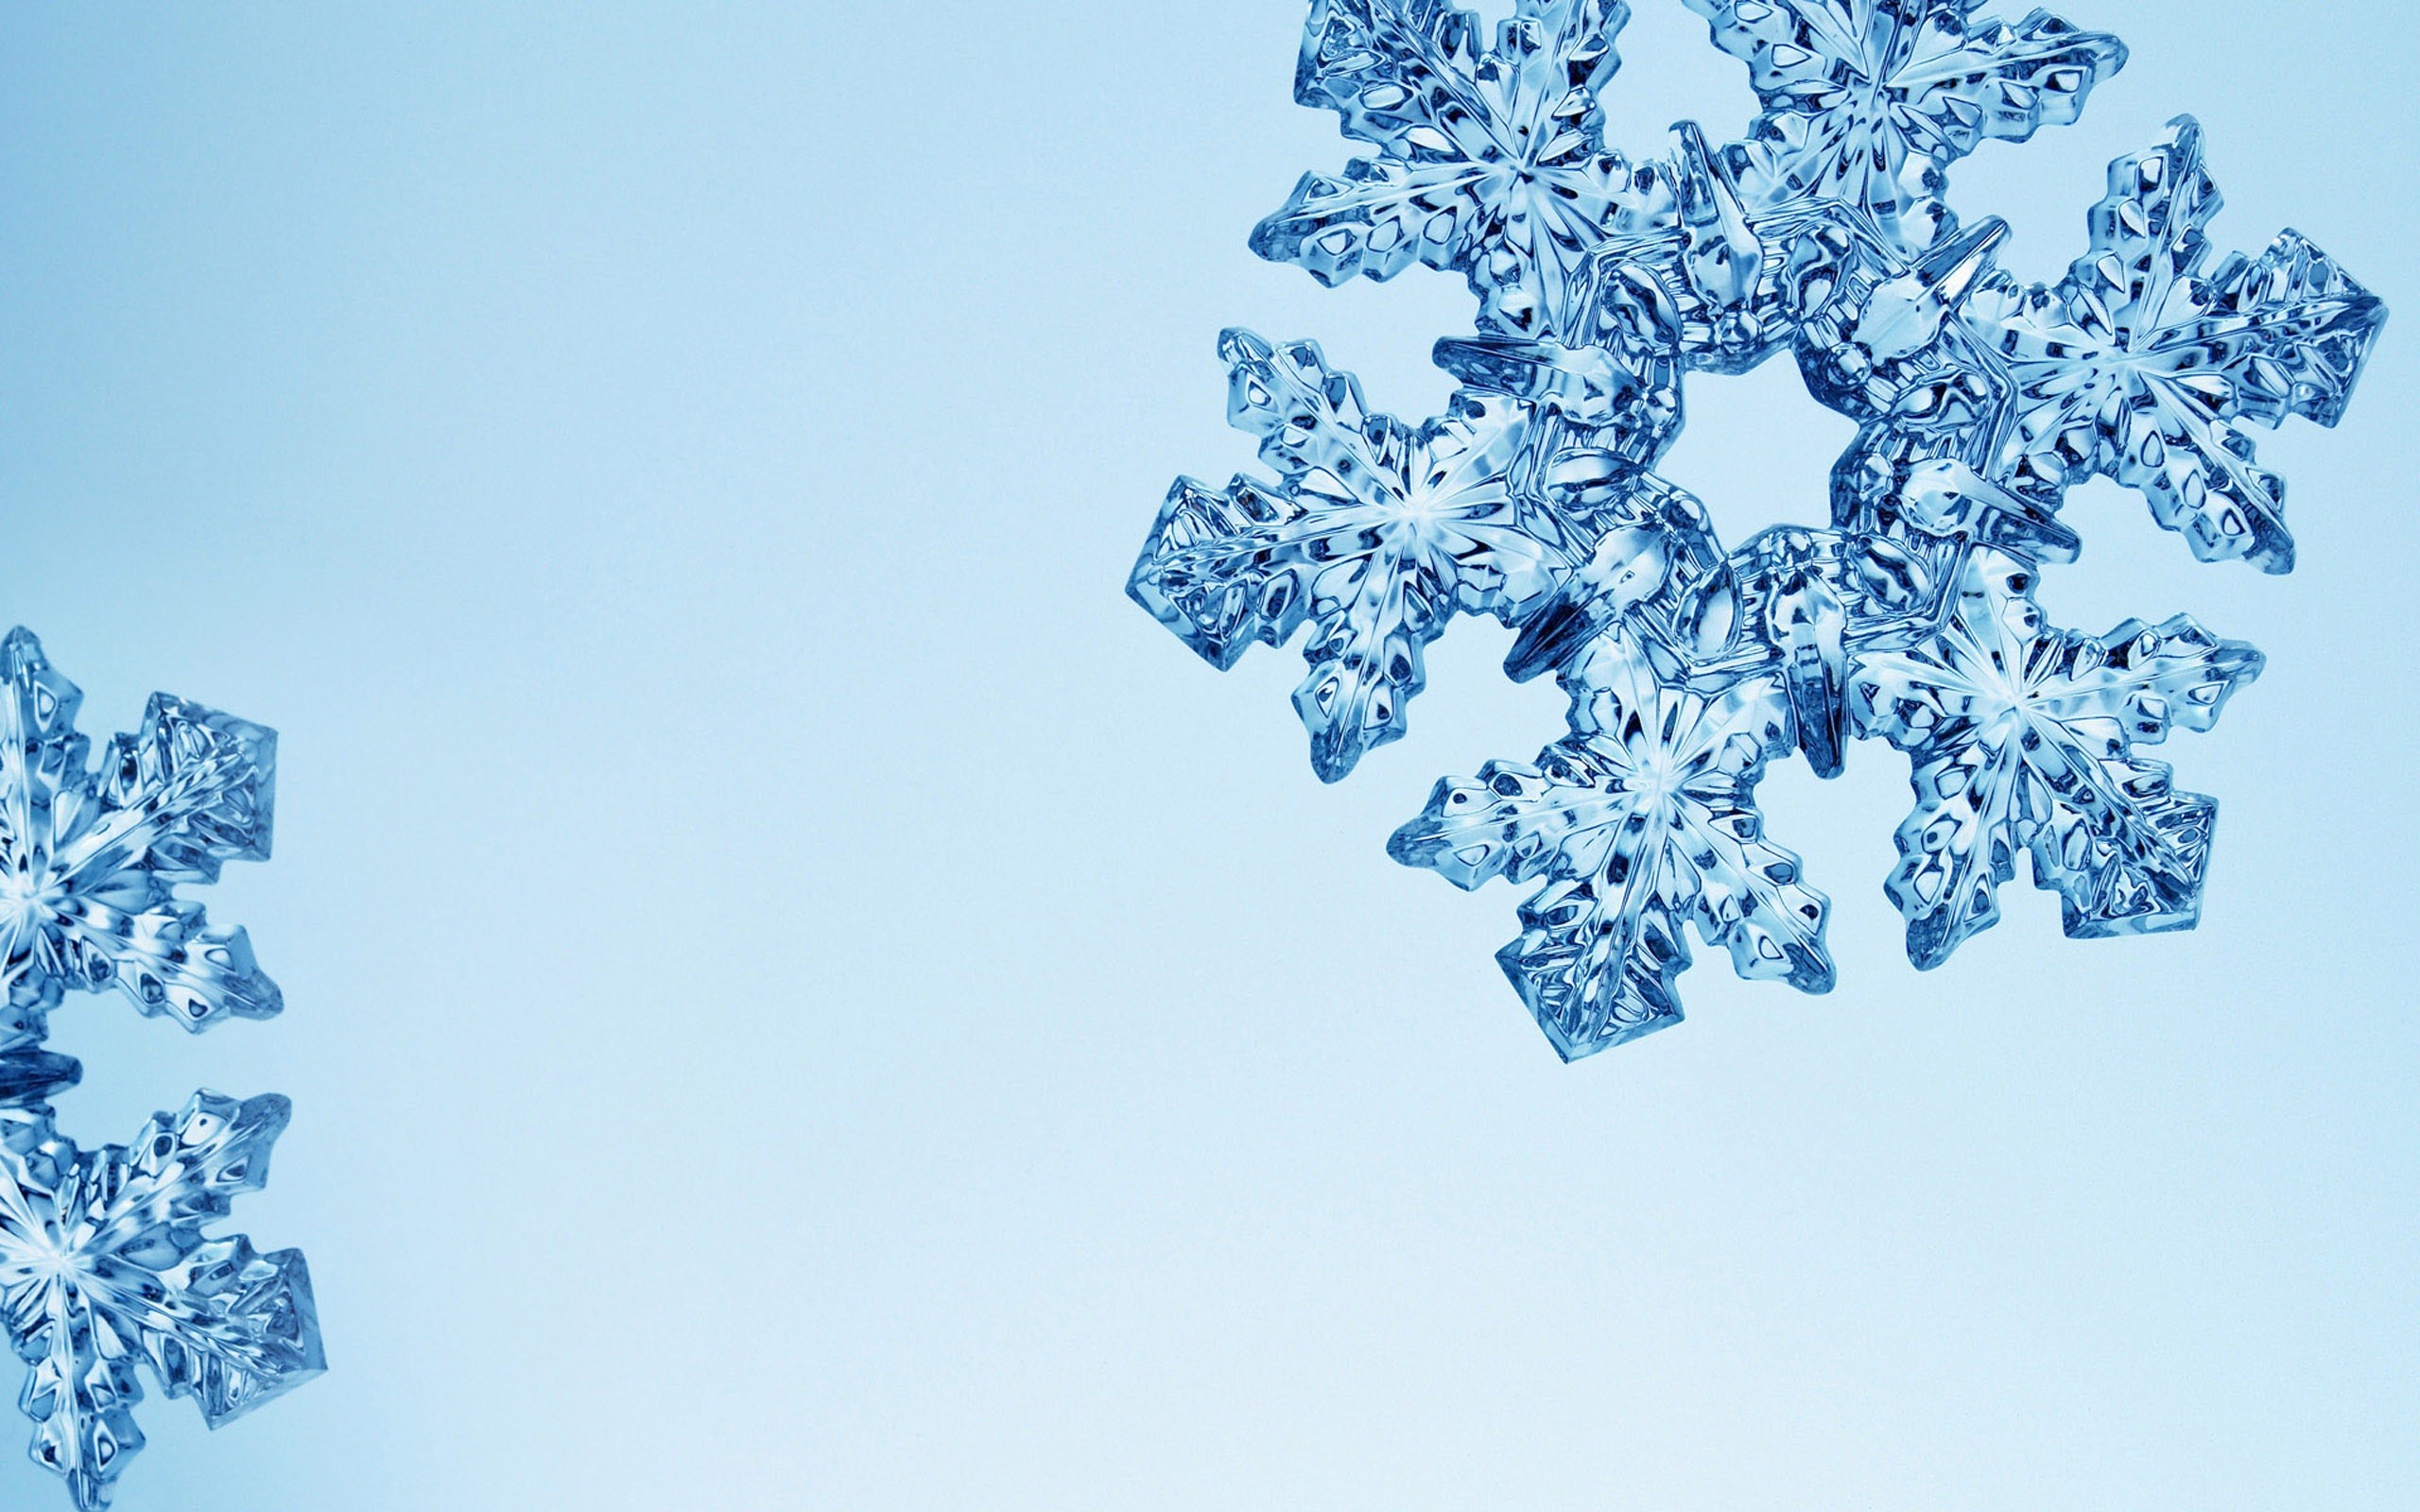 2560x1600 Snowflake-Backgrounds-For-Desktop